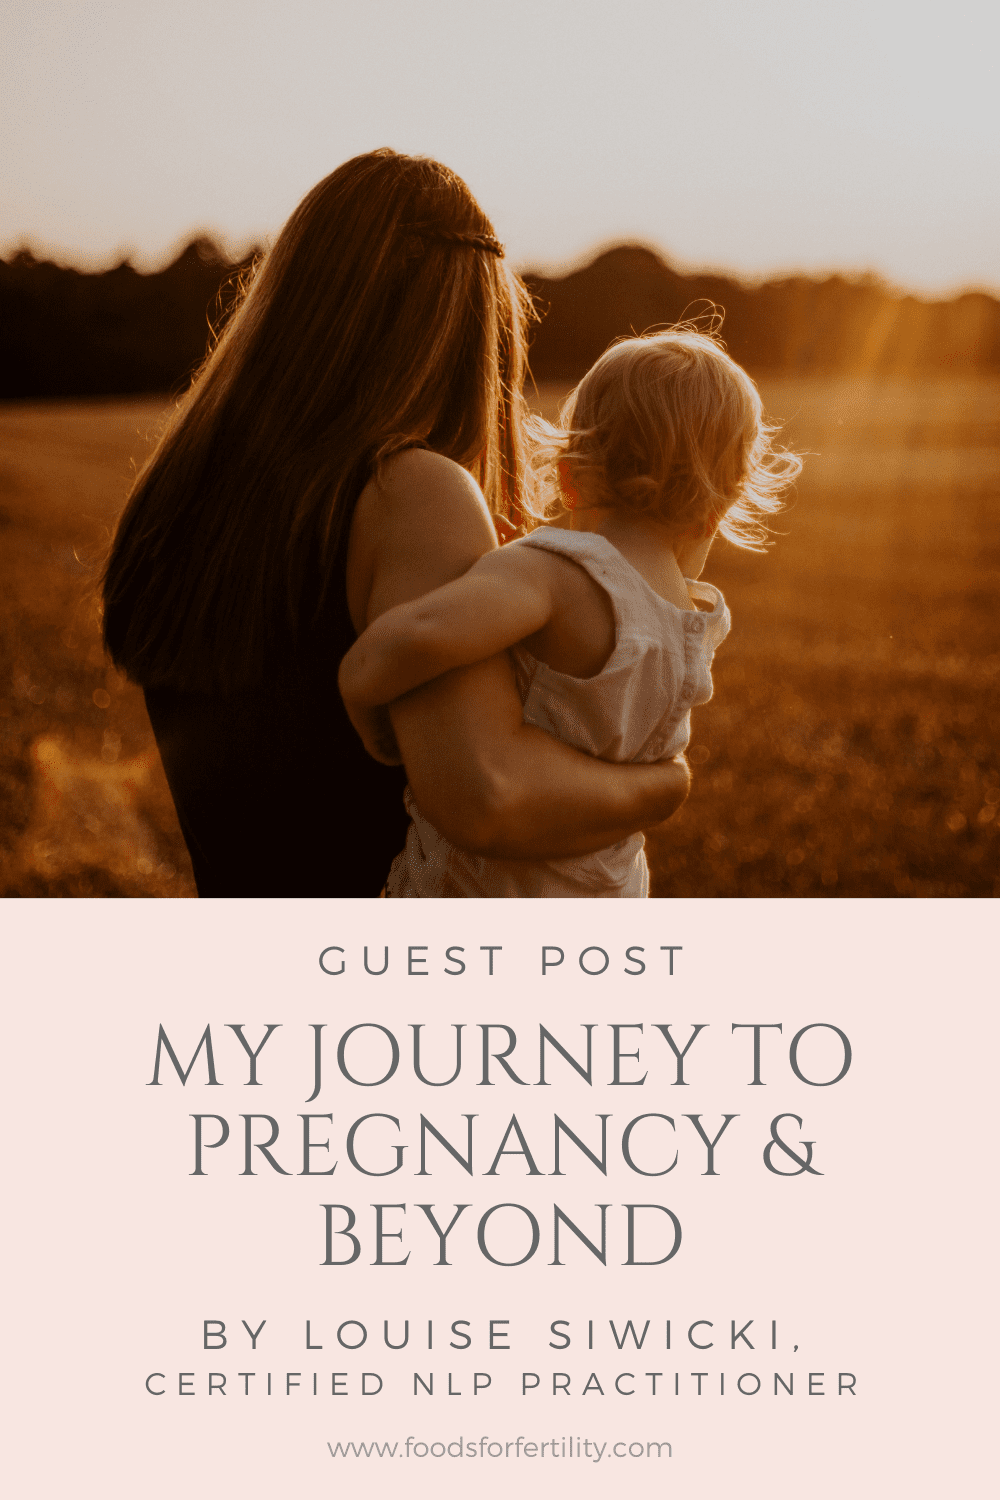 My Journey to Pregnancy and Beyond by Louise Siwicki